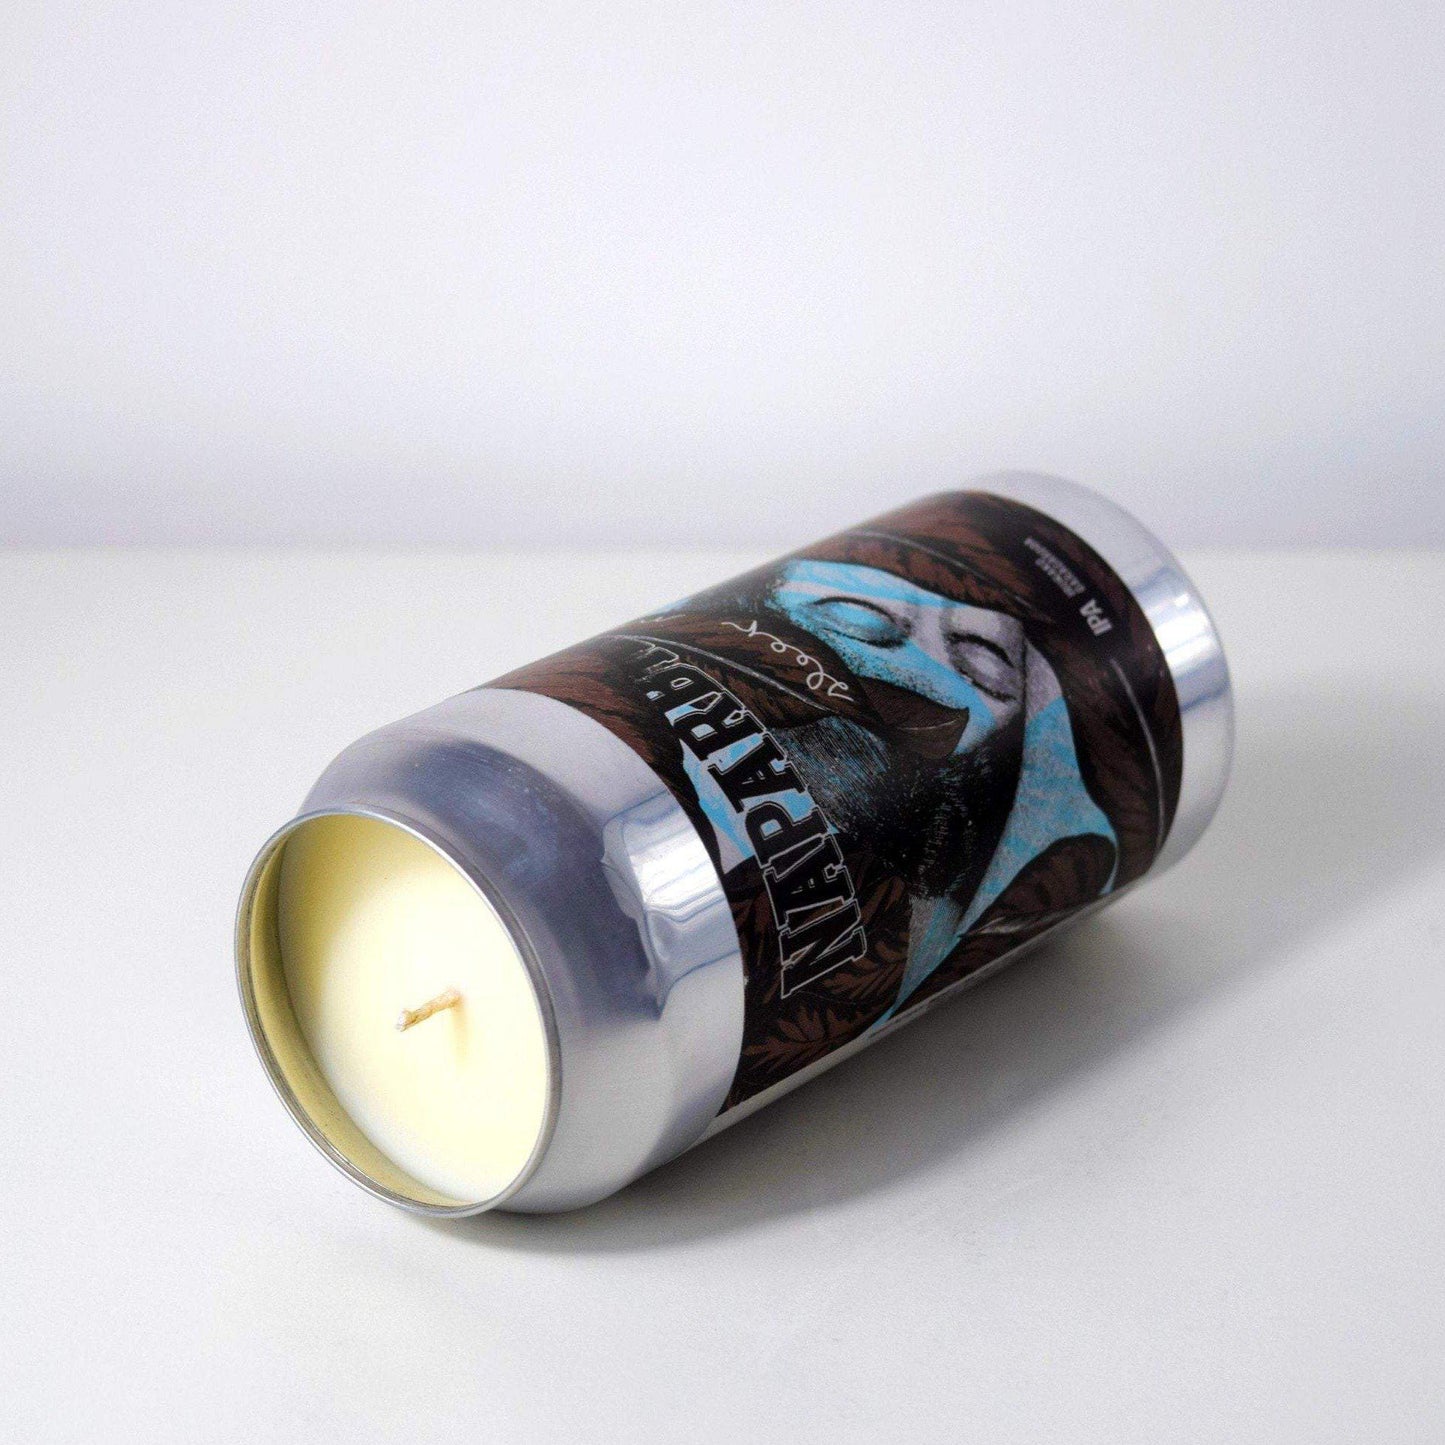 Naparbier Sleep Now Beer Can Candle-Beer Can Candles-Adhock Homeware